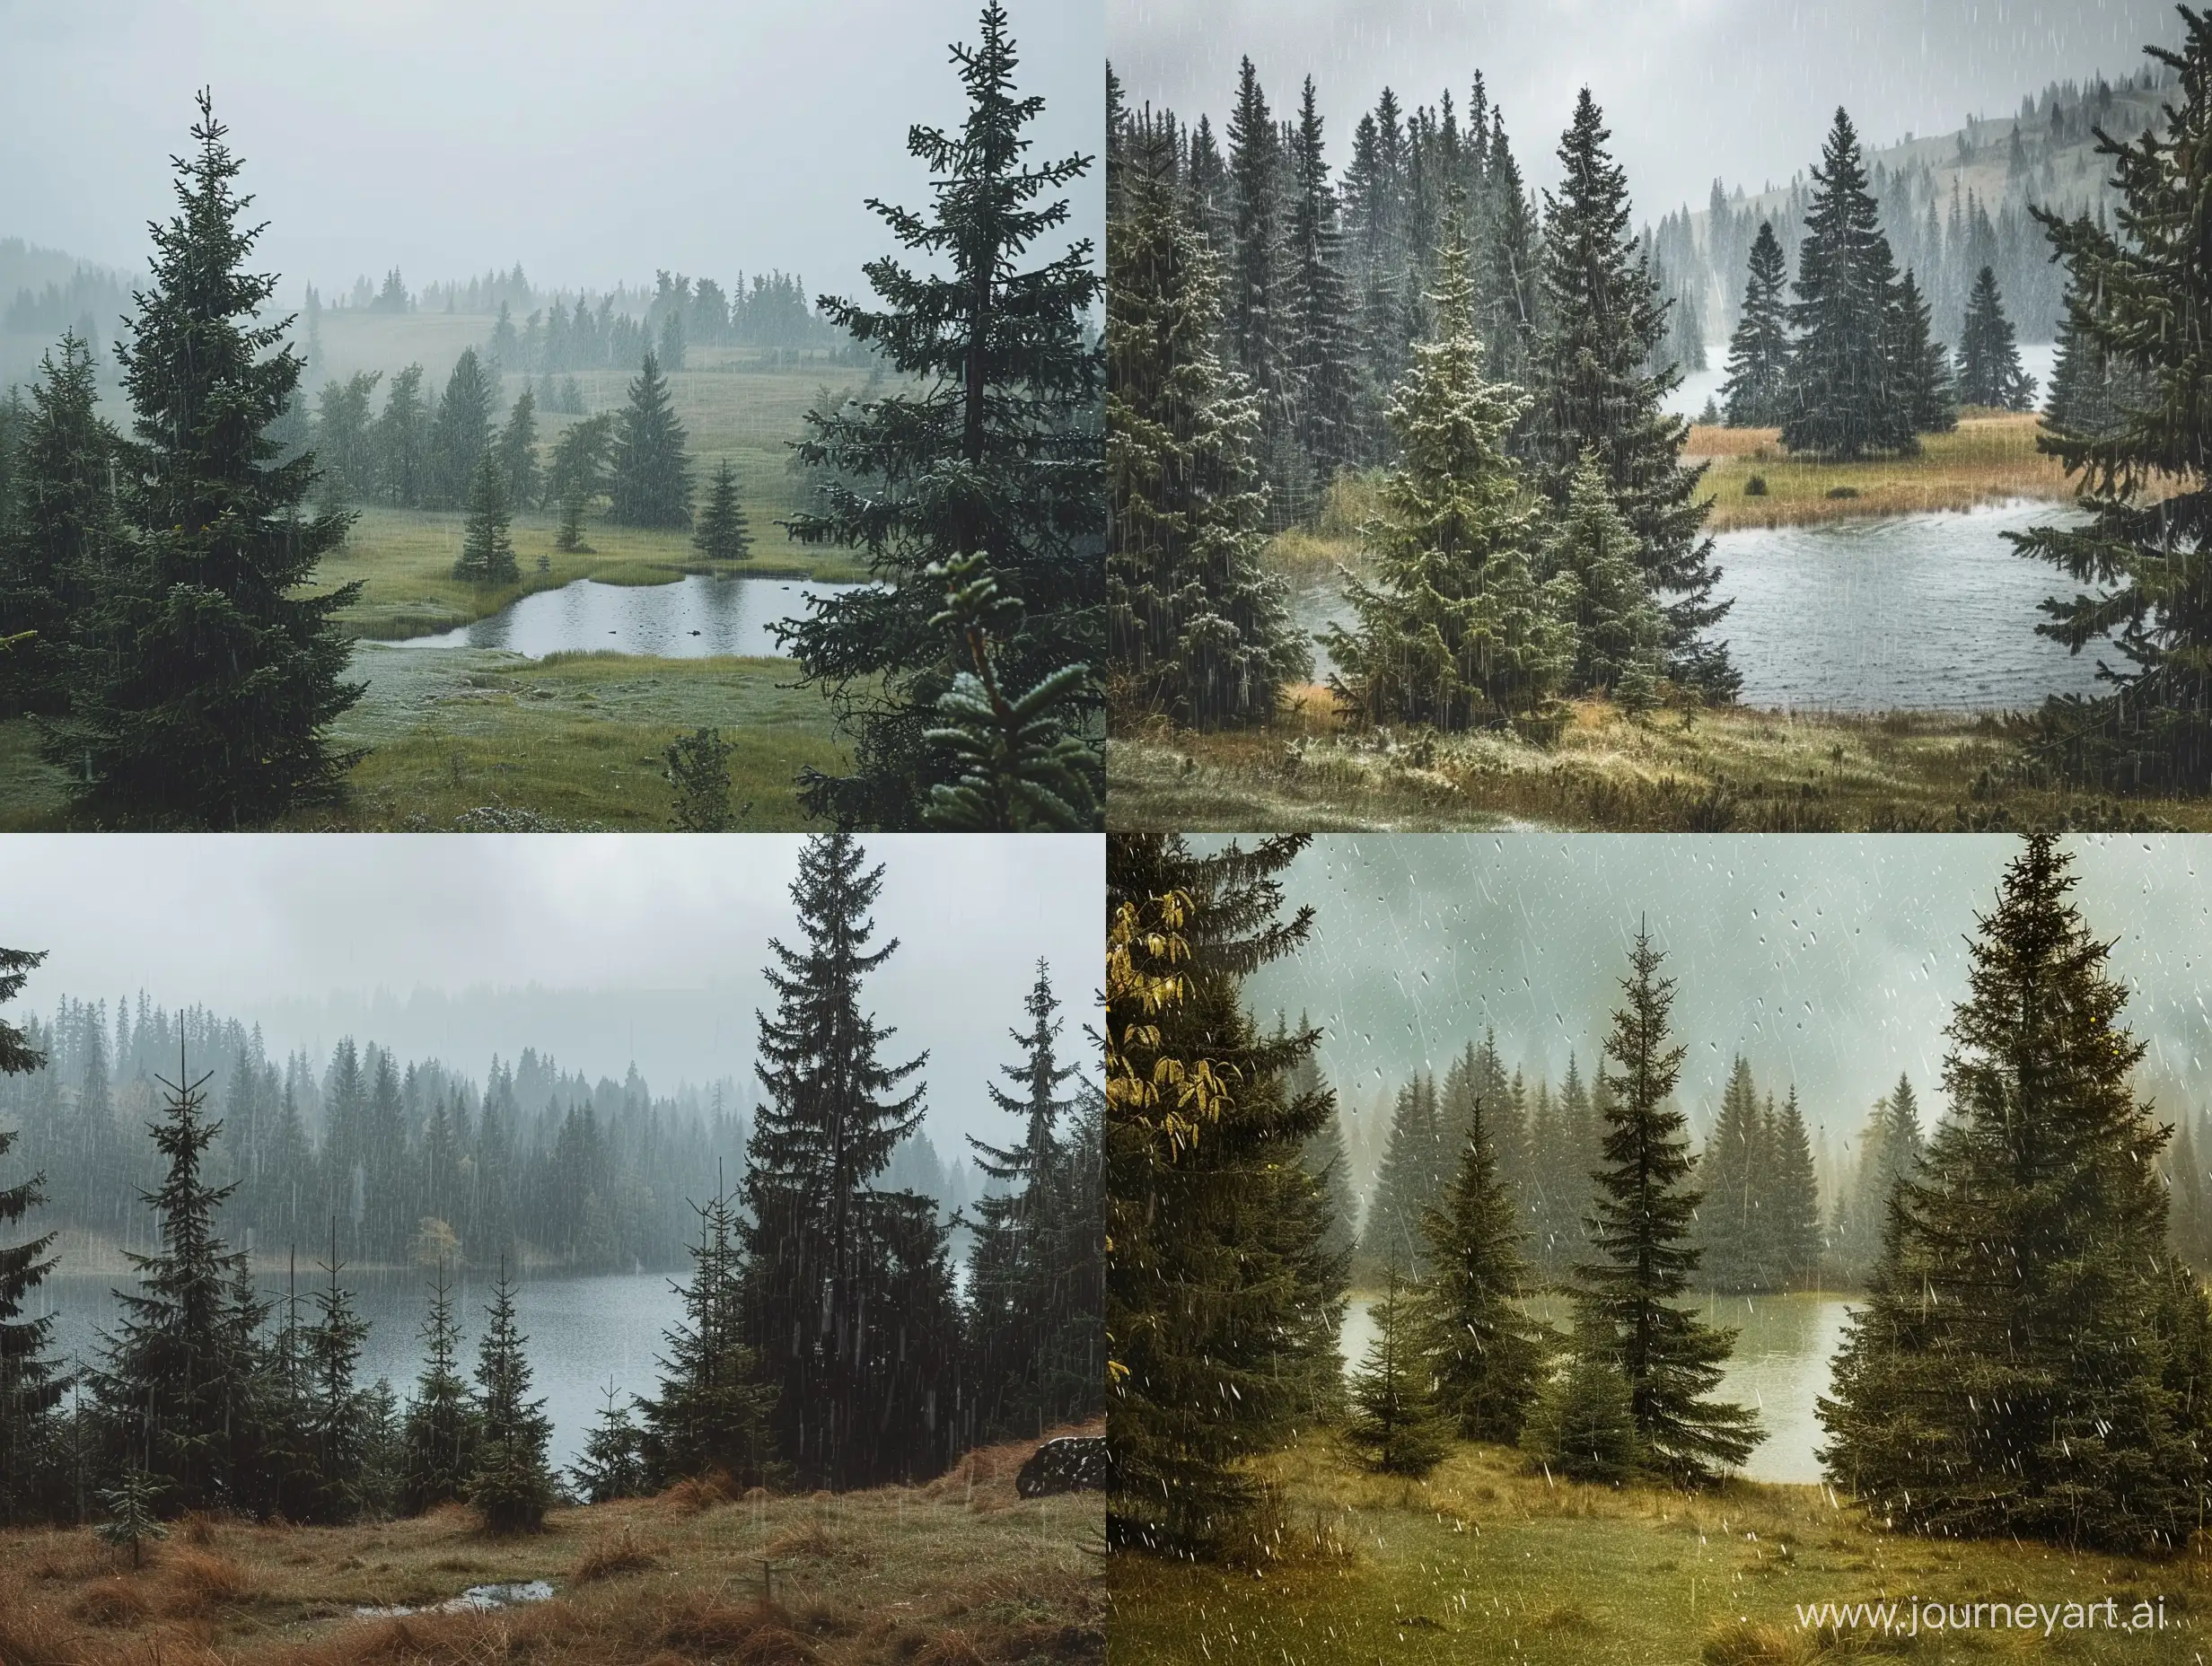 Majestic-Cinematic-Rainy-Countryside-with-Fir-and-Pine-Trees-by-a-Tranquil-Body-of-Water